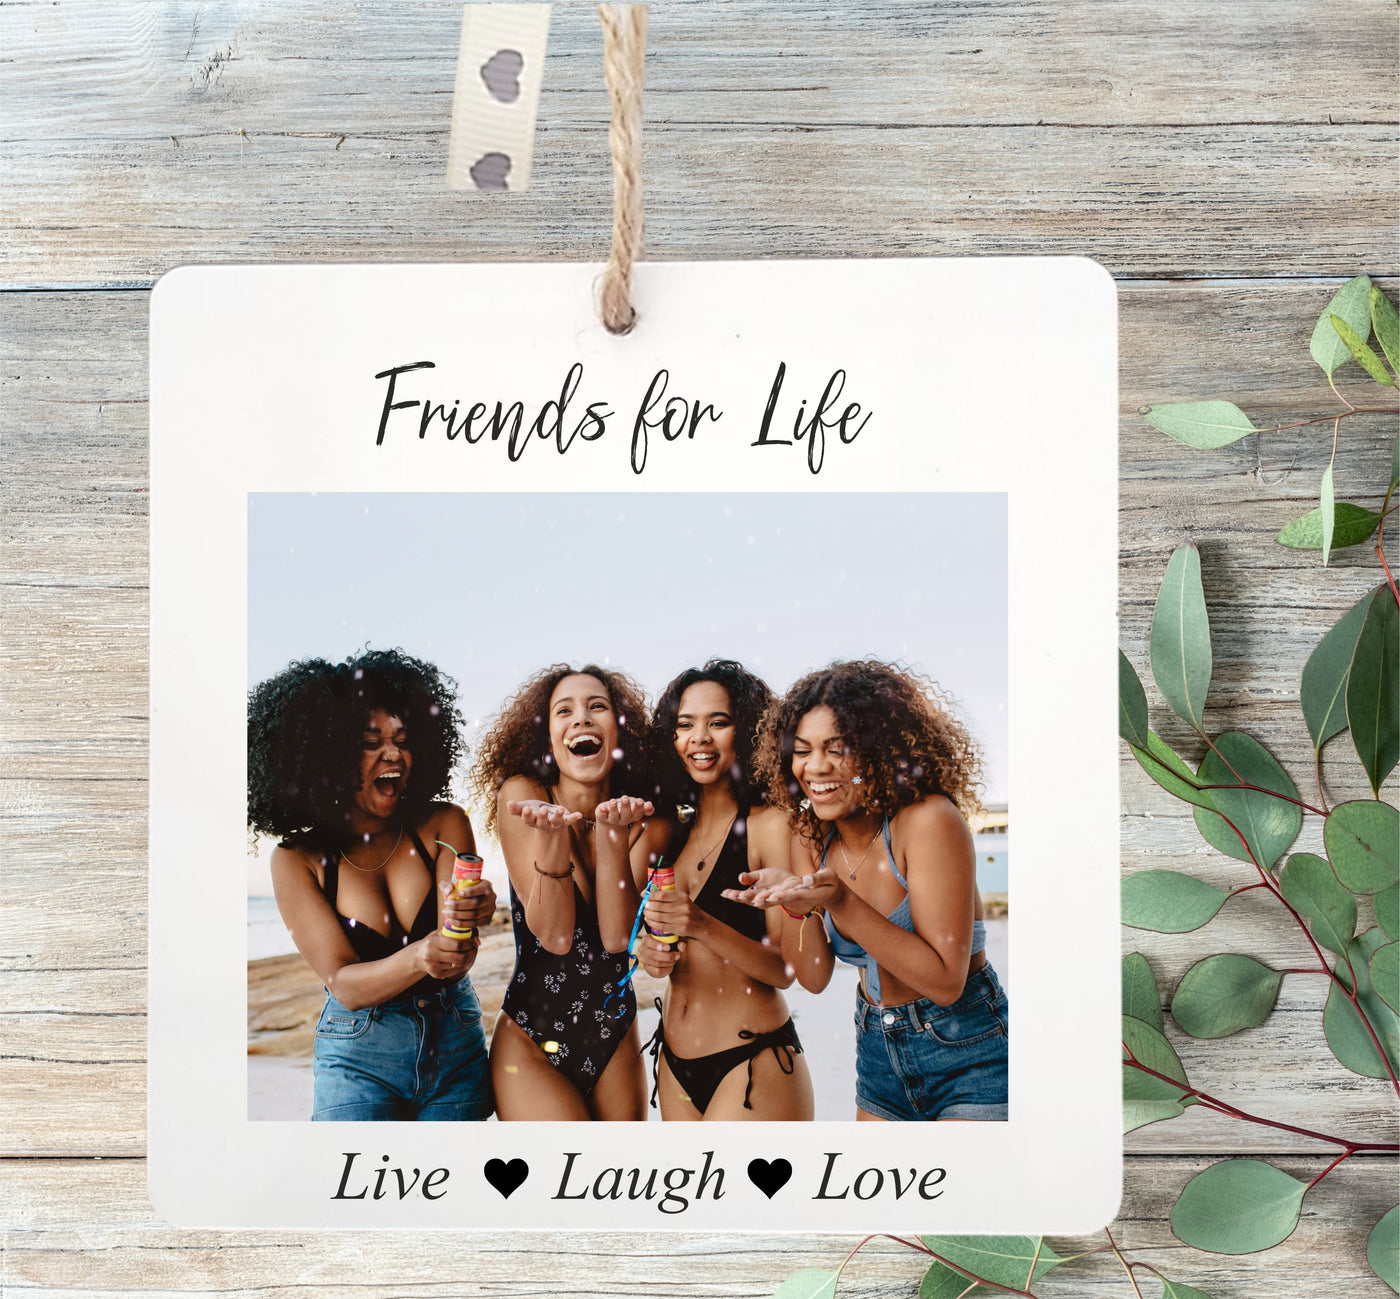 20 Heartwarming Friendship Gift Ideas to Give Your Best Friend